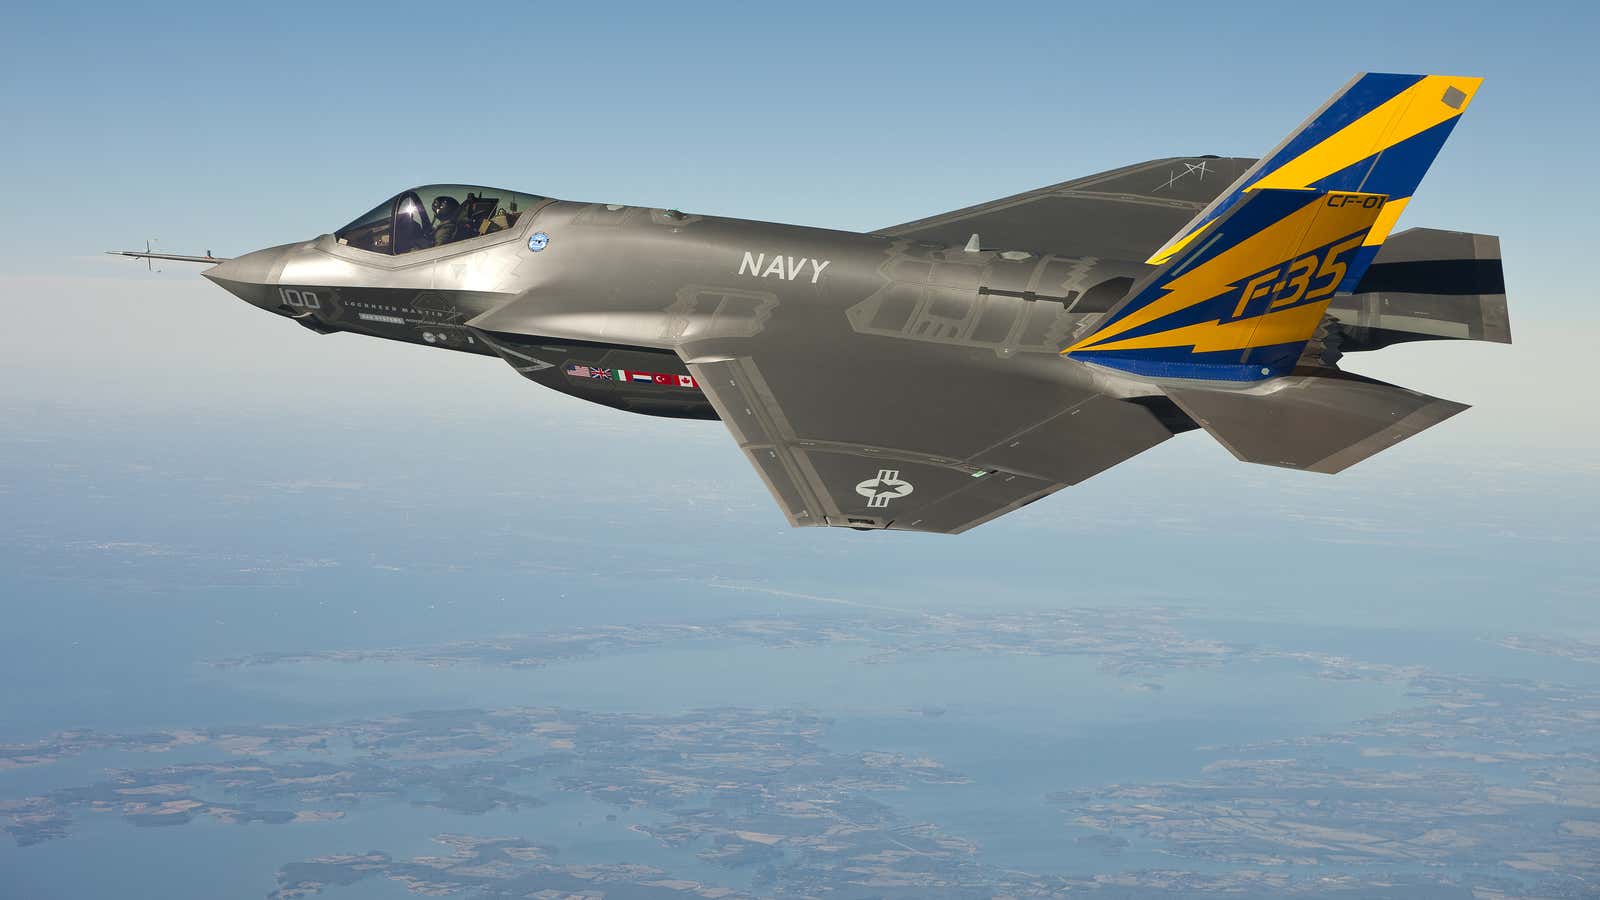 A variant of the F-35 Joint Strike Fighter. The US is expected to spend about $396 billion on the program, according to the Government Accountability Office.